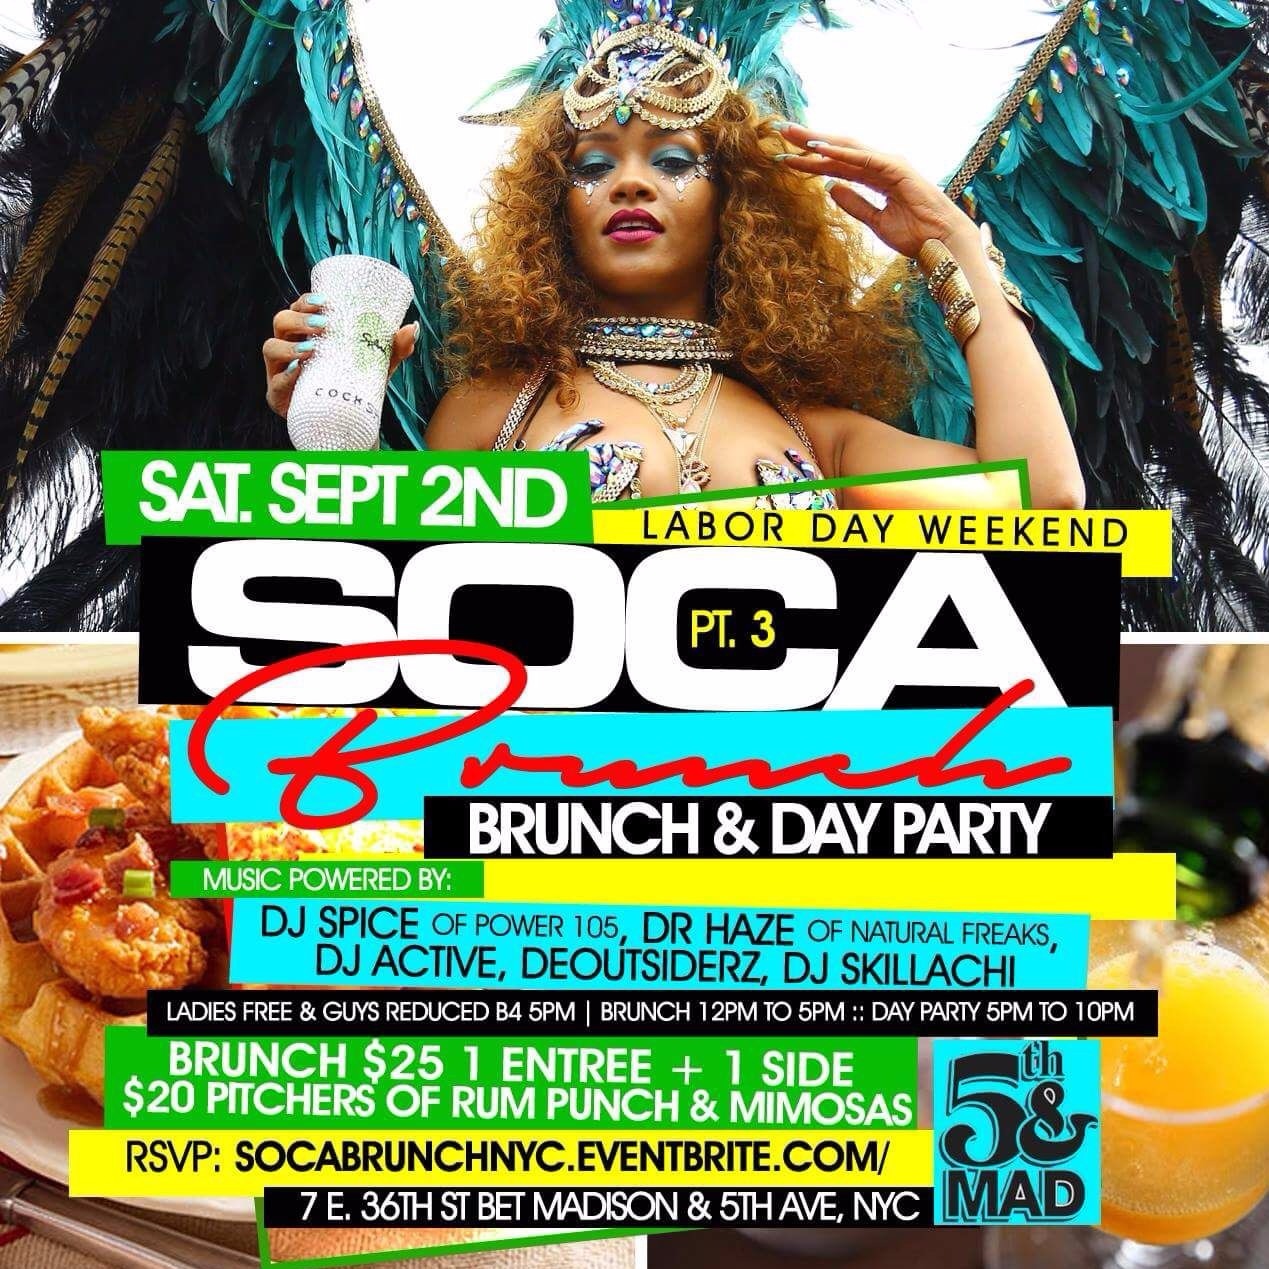 Soca Brunch pt 3 Sat. September 2nd at 5TH & MAD. Ladies FREE Before 5pm with RSVP